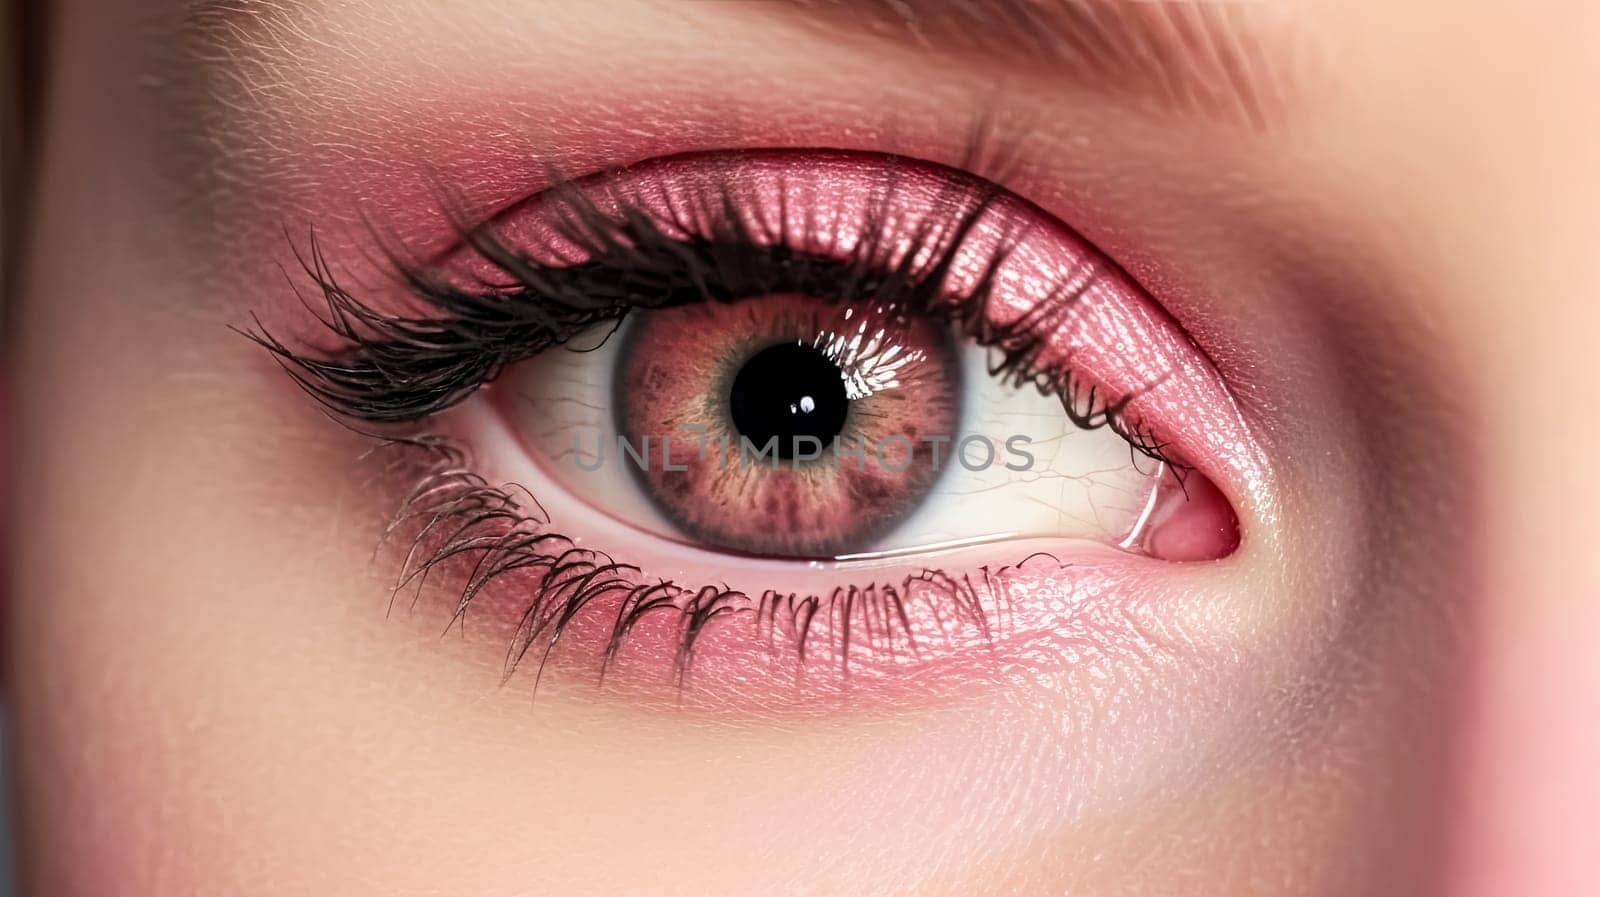 A woman's eye is painted with a colorful design. The colors are bright and bold, creating a fun and playful look. The eye makeup is likely inspired by a street art or graffiti style